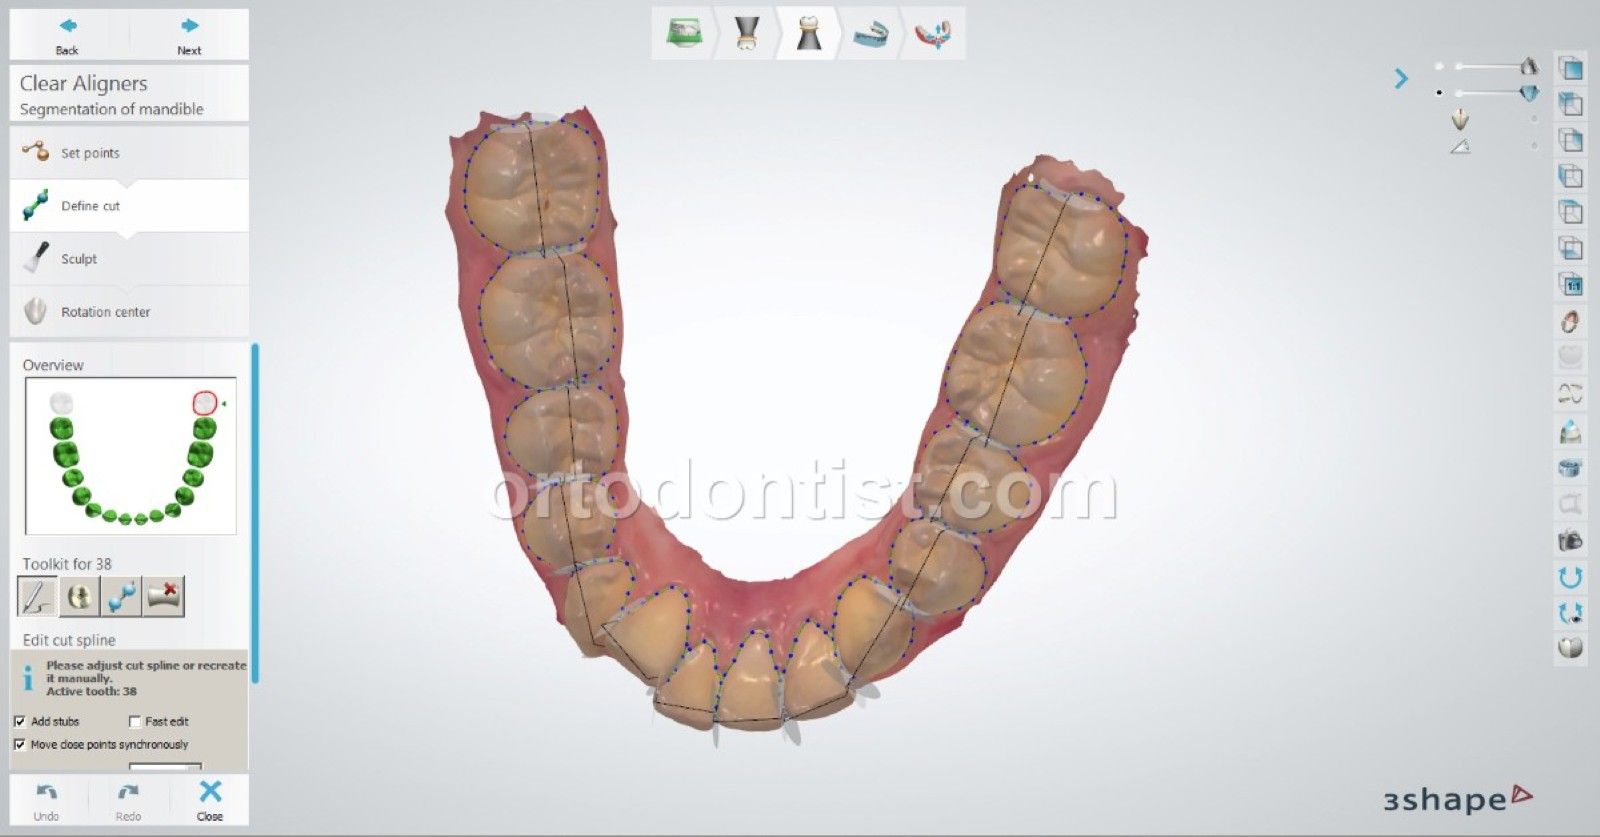 clear aligners young patient m.e 8